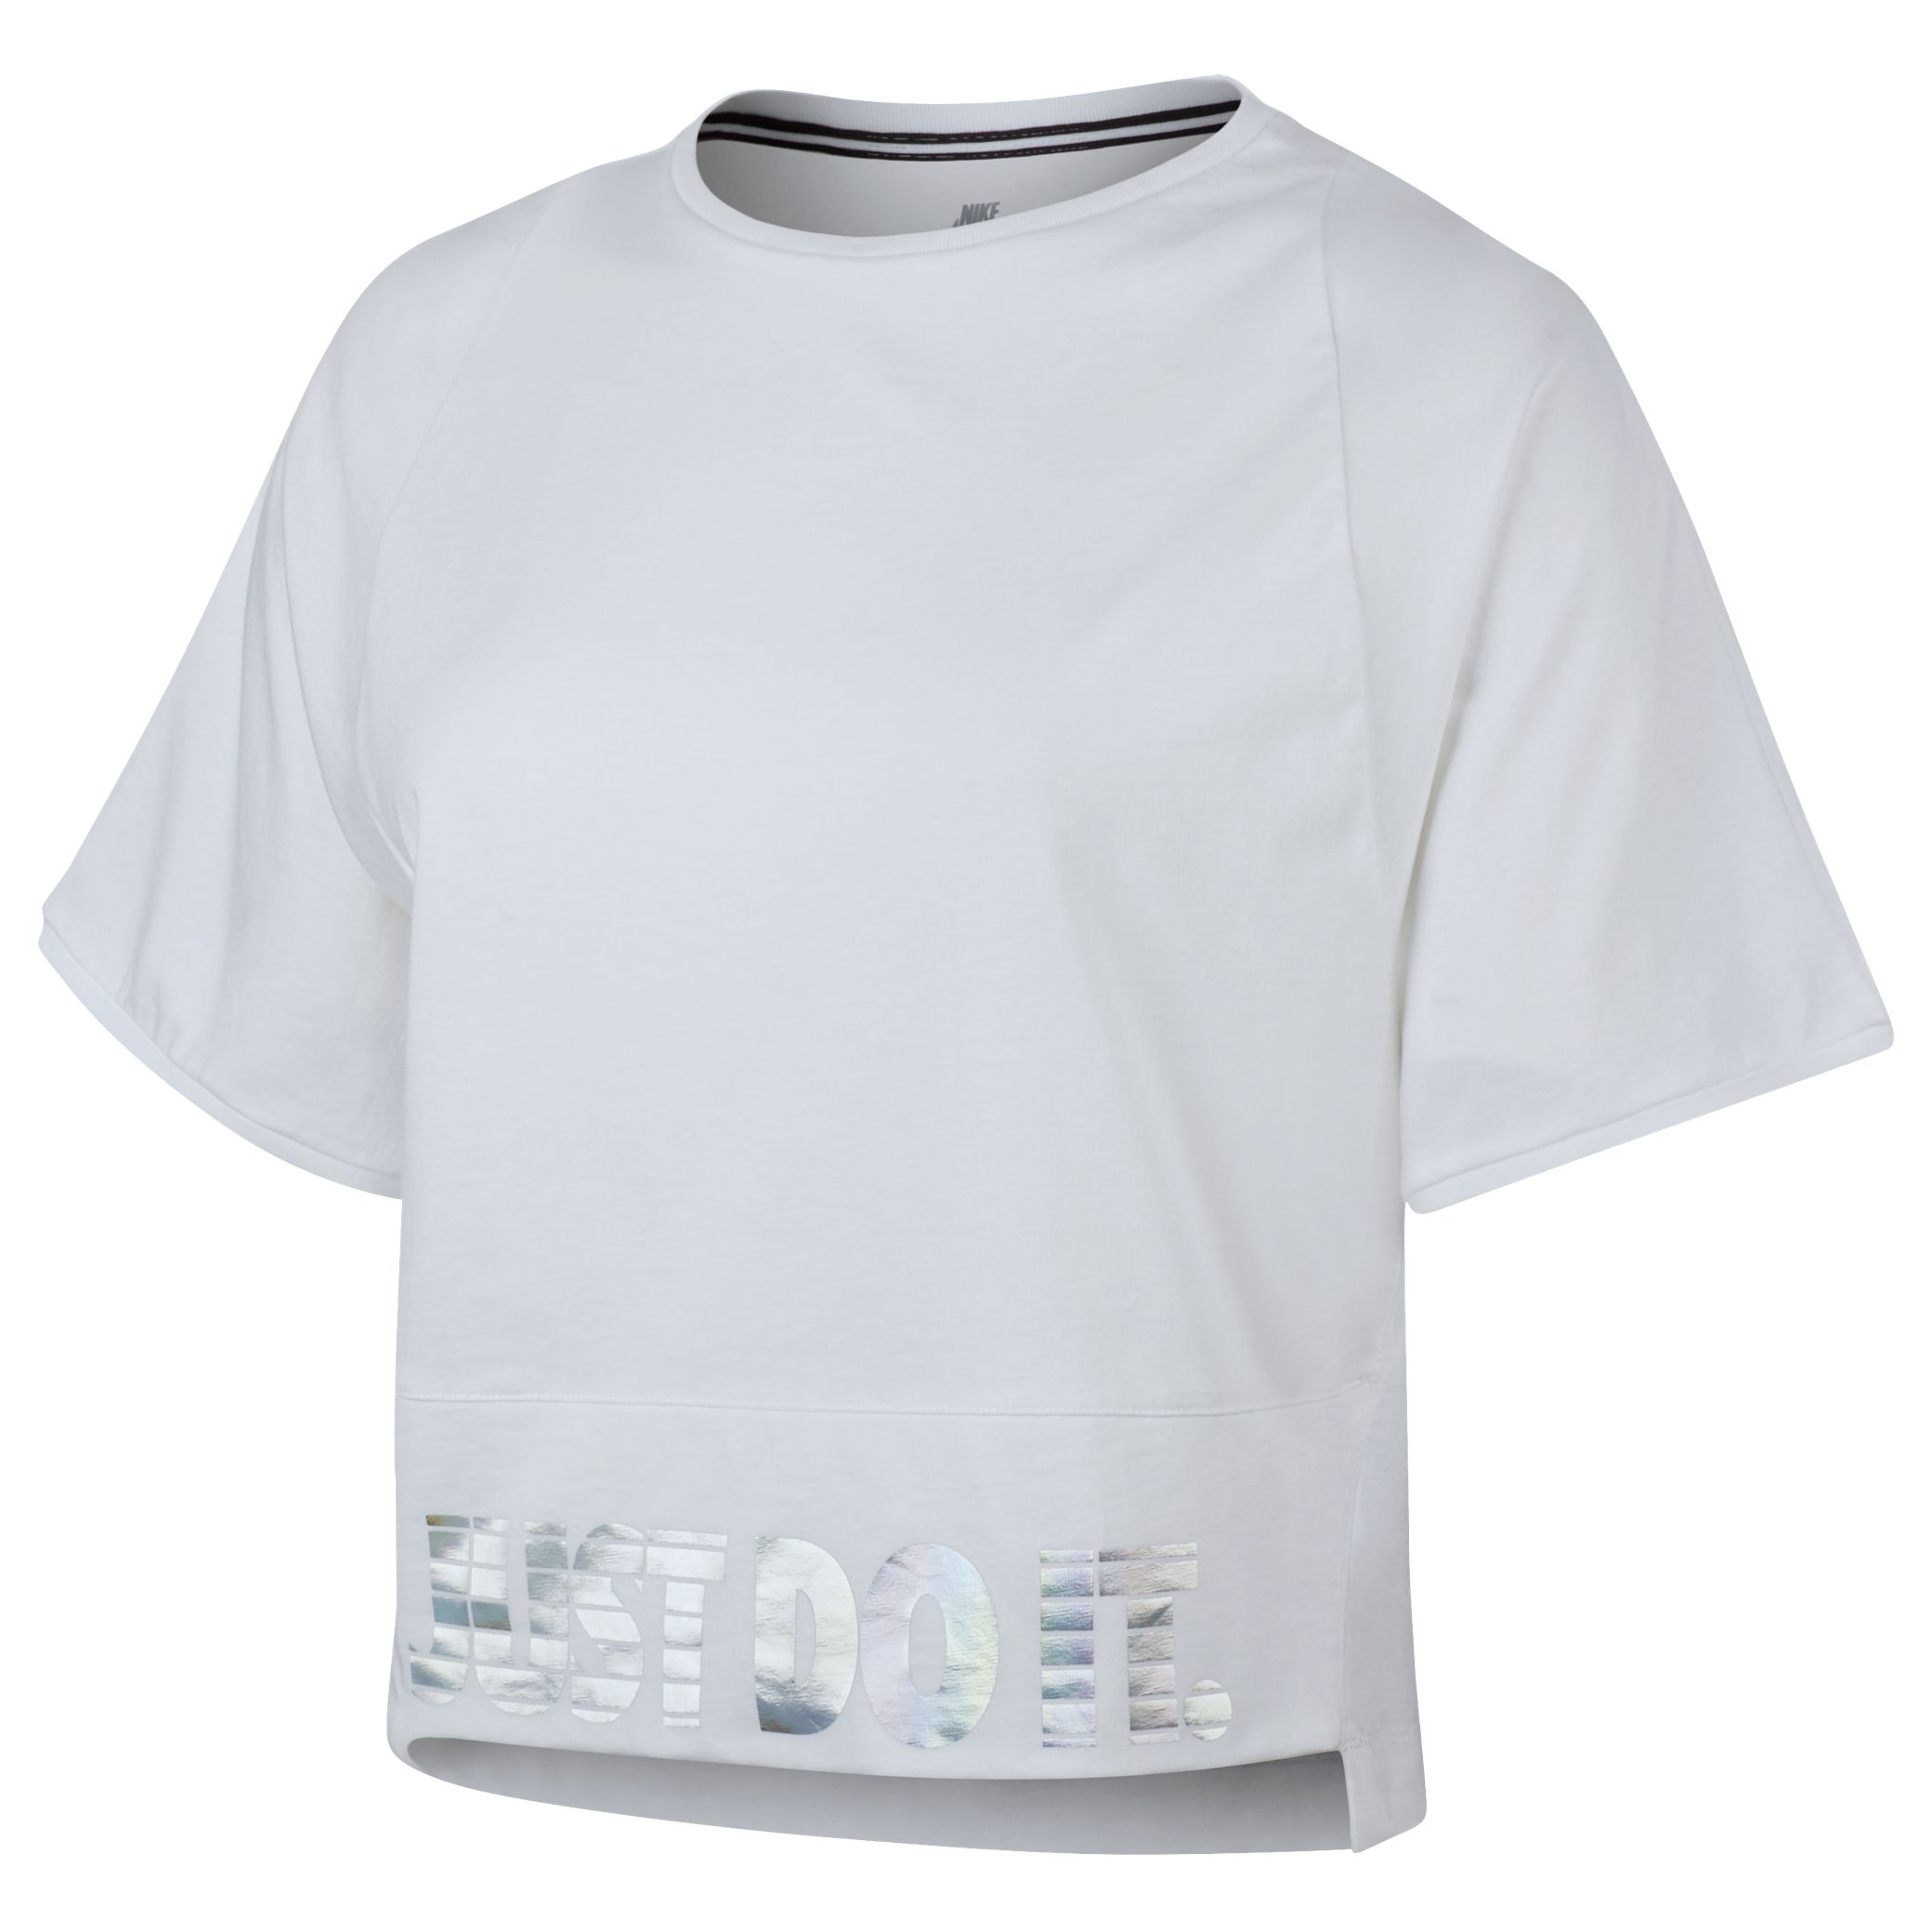 Nike Holographic Logo Crop Top, White, S